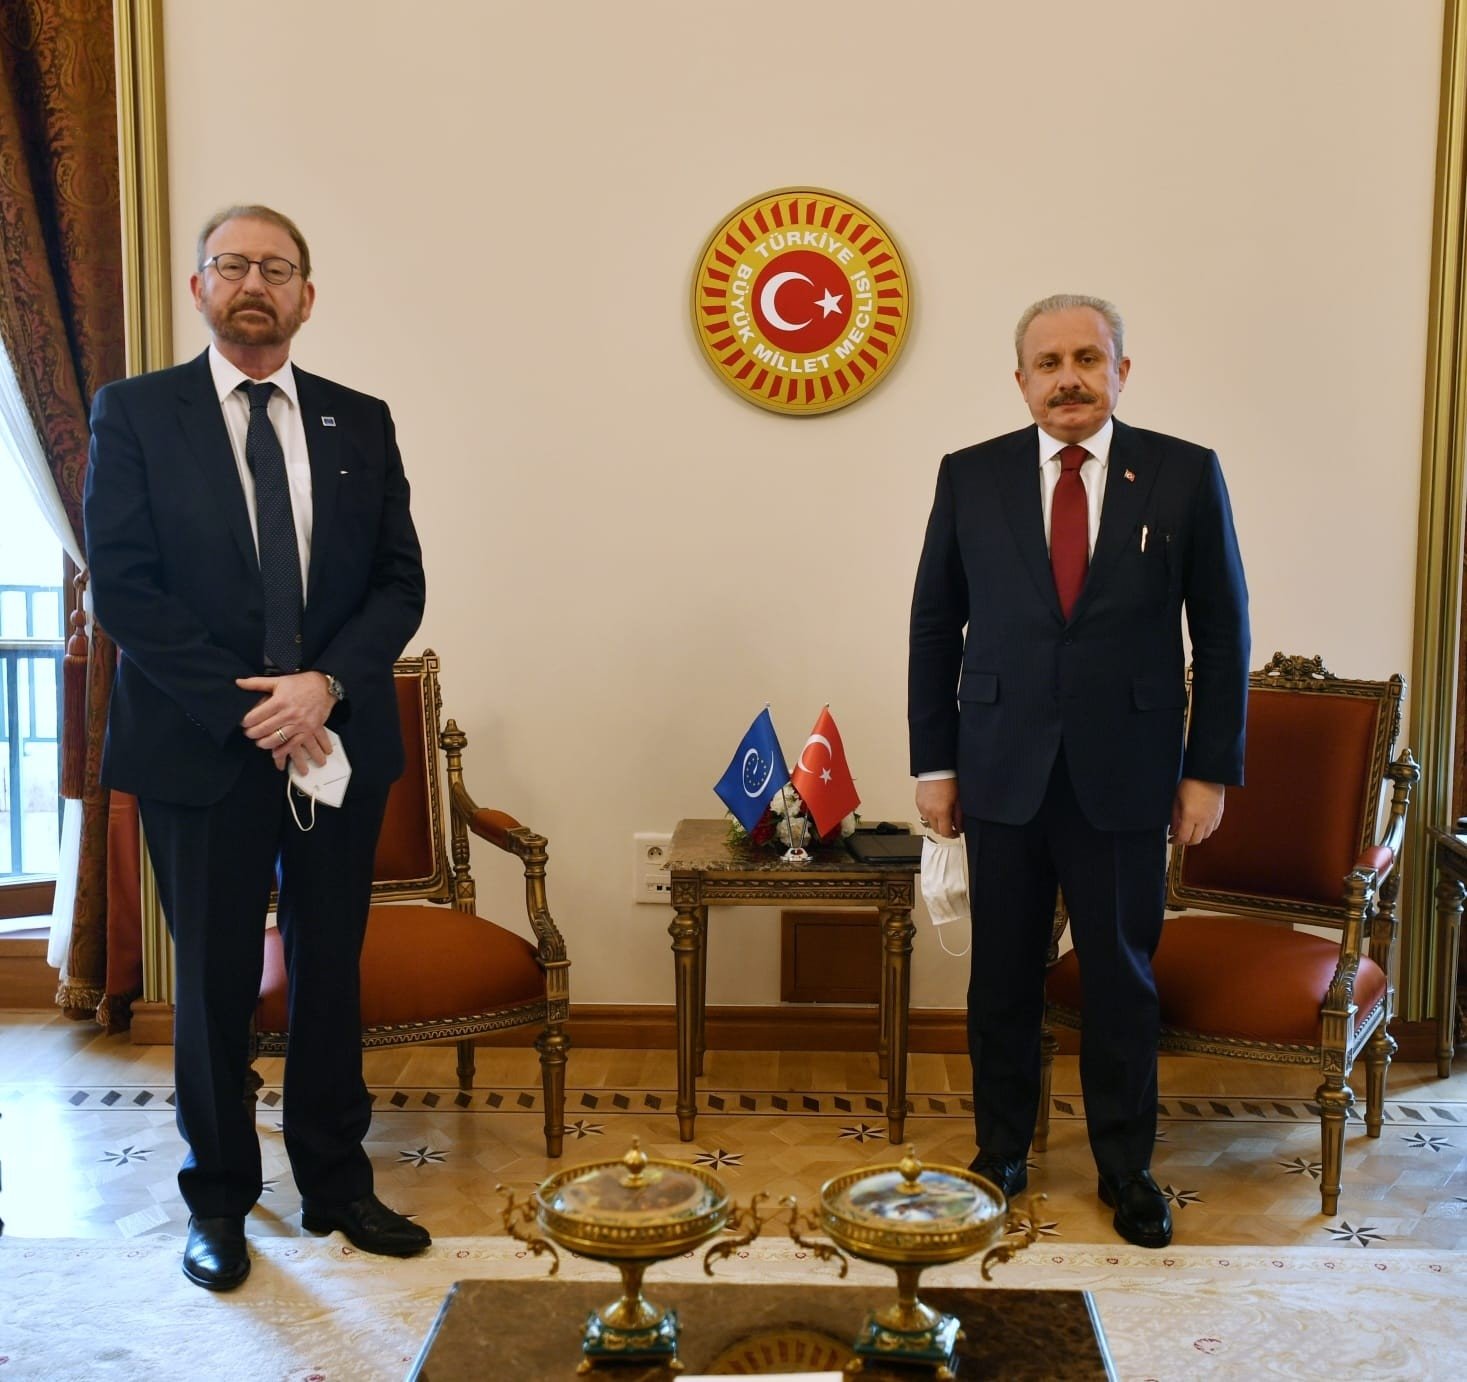 Rik Daems (L), the president of the Parliamentary Assembly of the Council of Europe, and Parliamentary Speaker Mustafa Şentop pose for a picture after their meeting in the capital Ankara, Turkey, March 30, 2021 (IHA Photo)